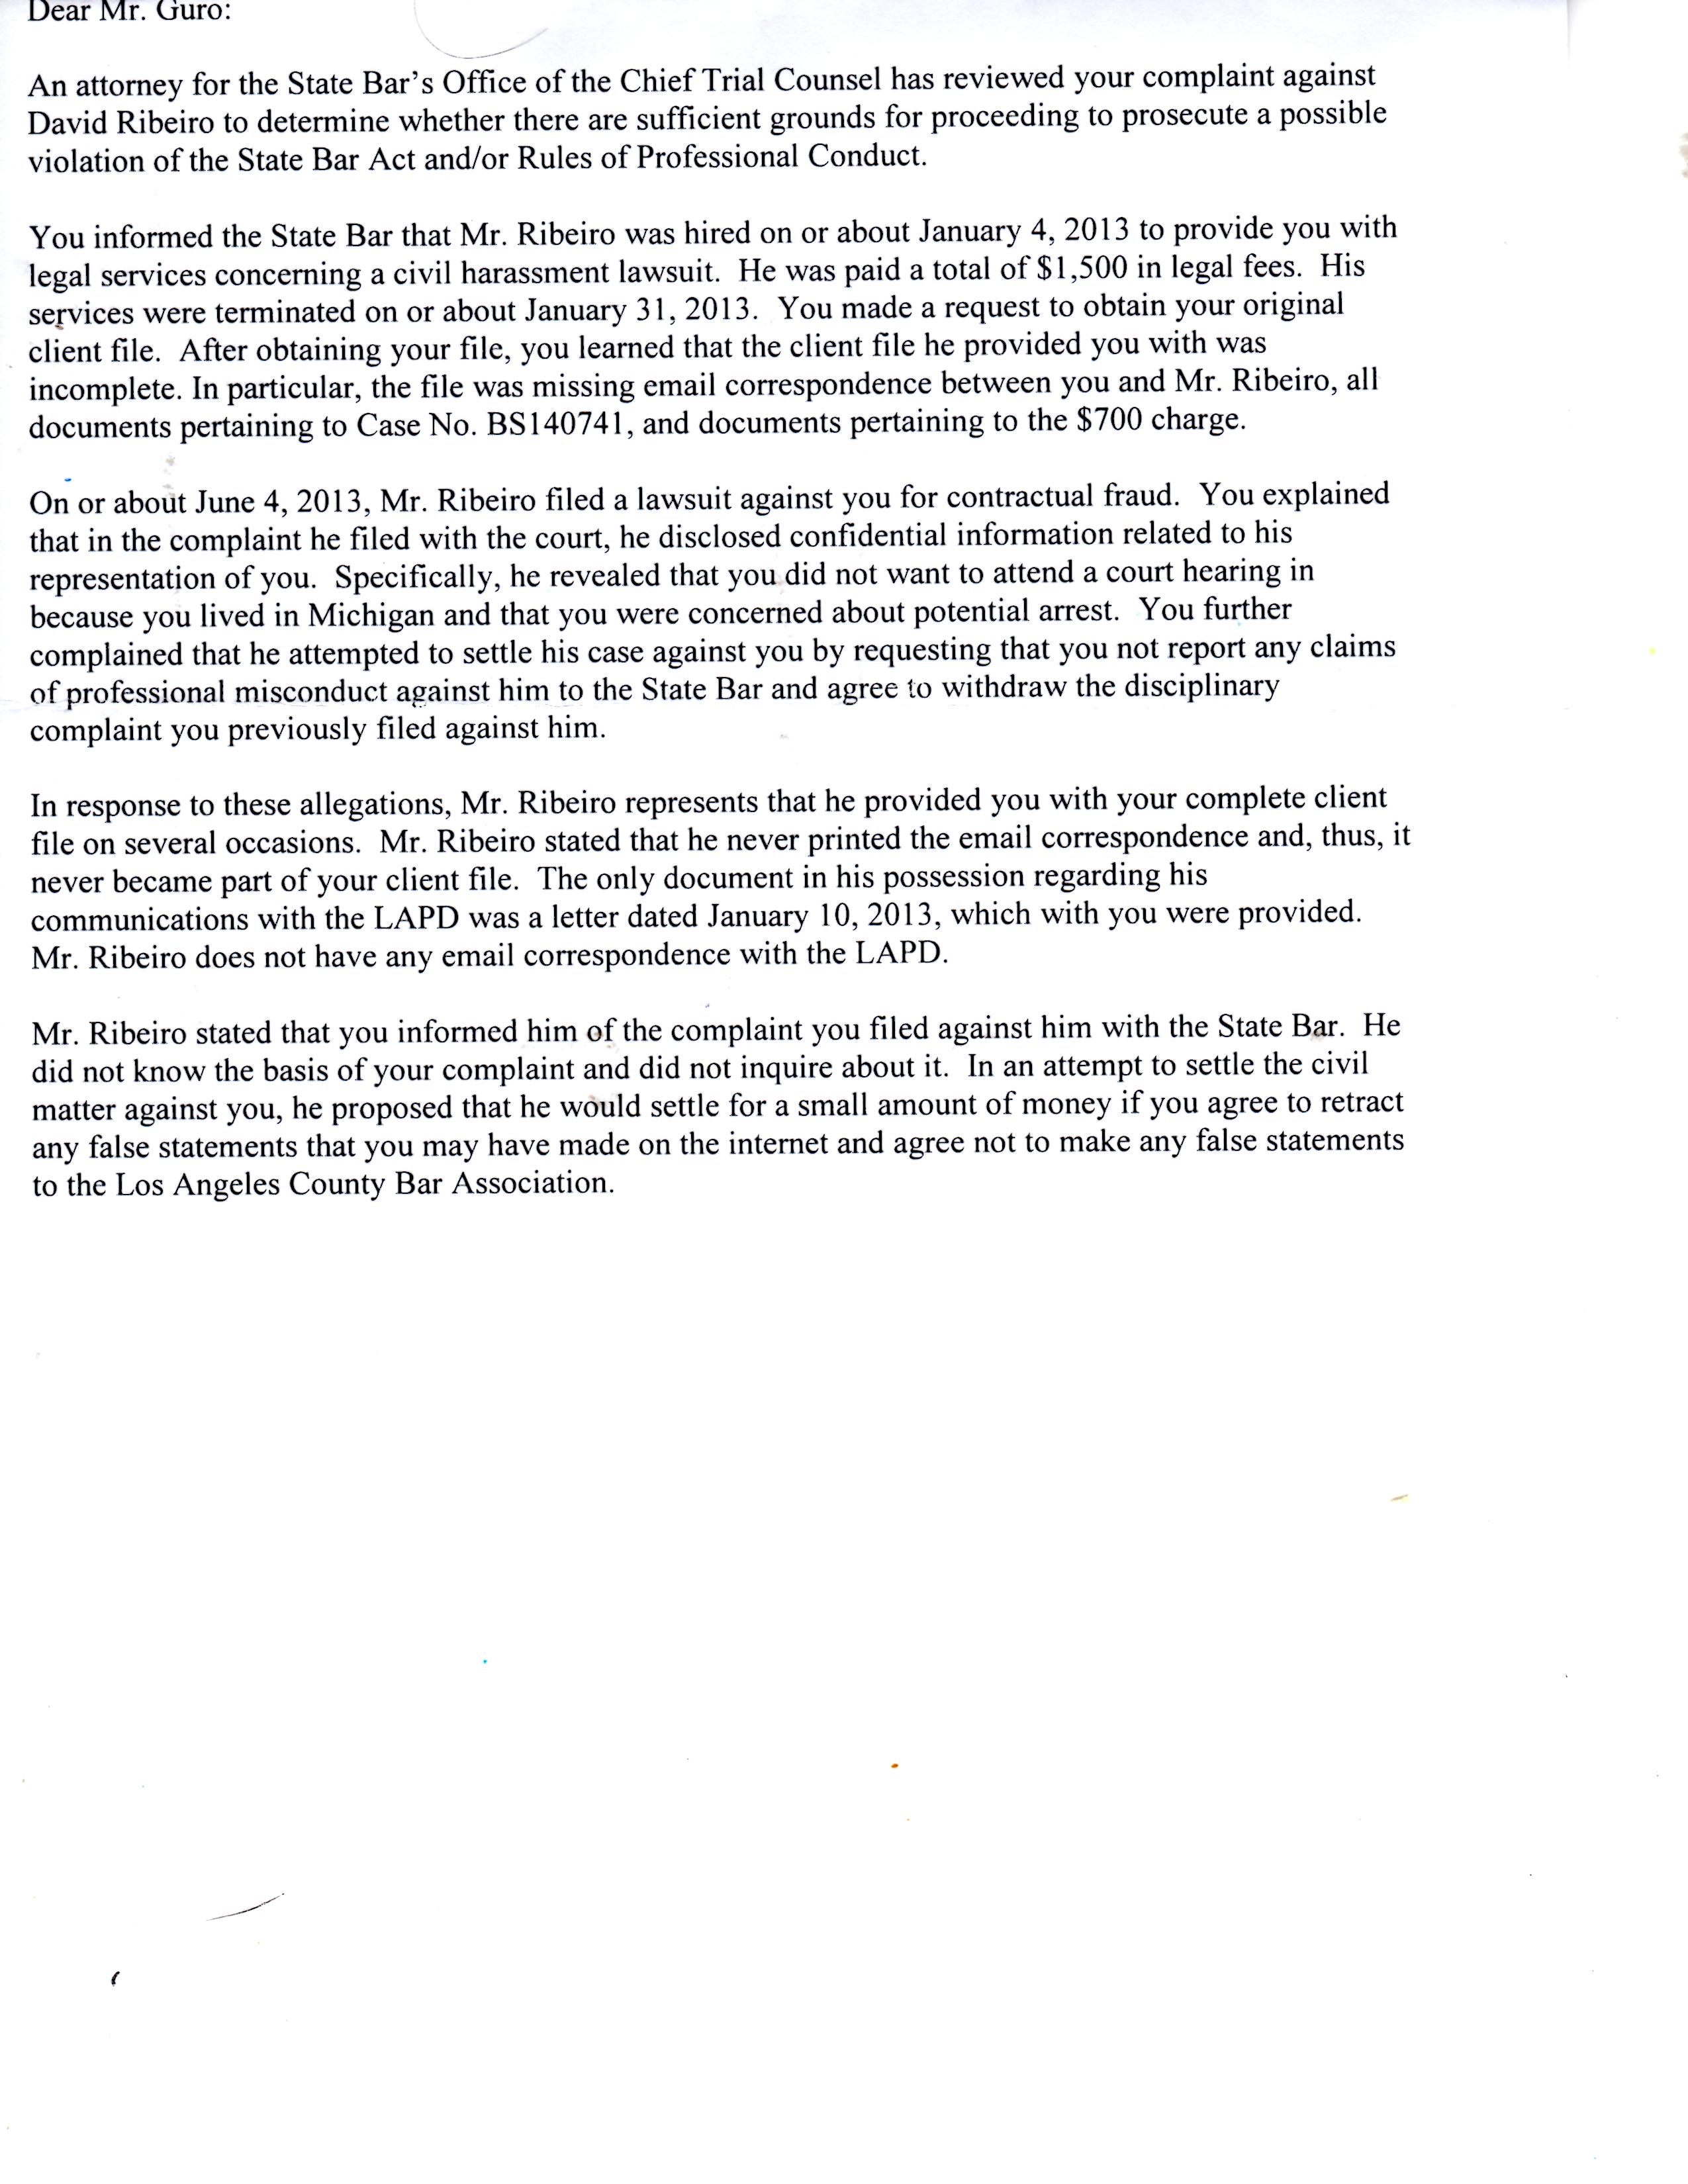 First Page - State Bar Response indicating lack of legal knowledge regarding file maintenance